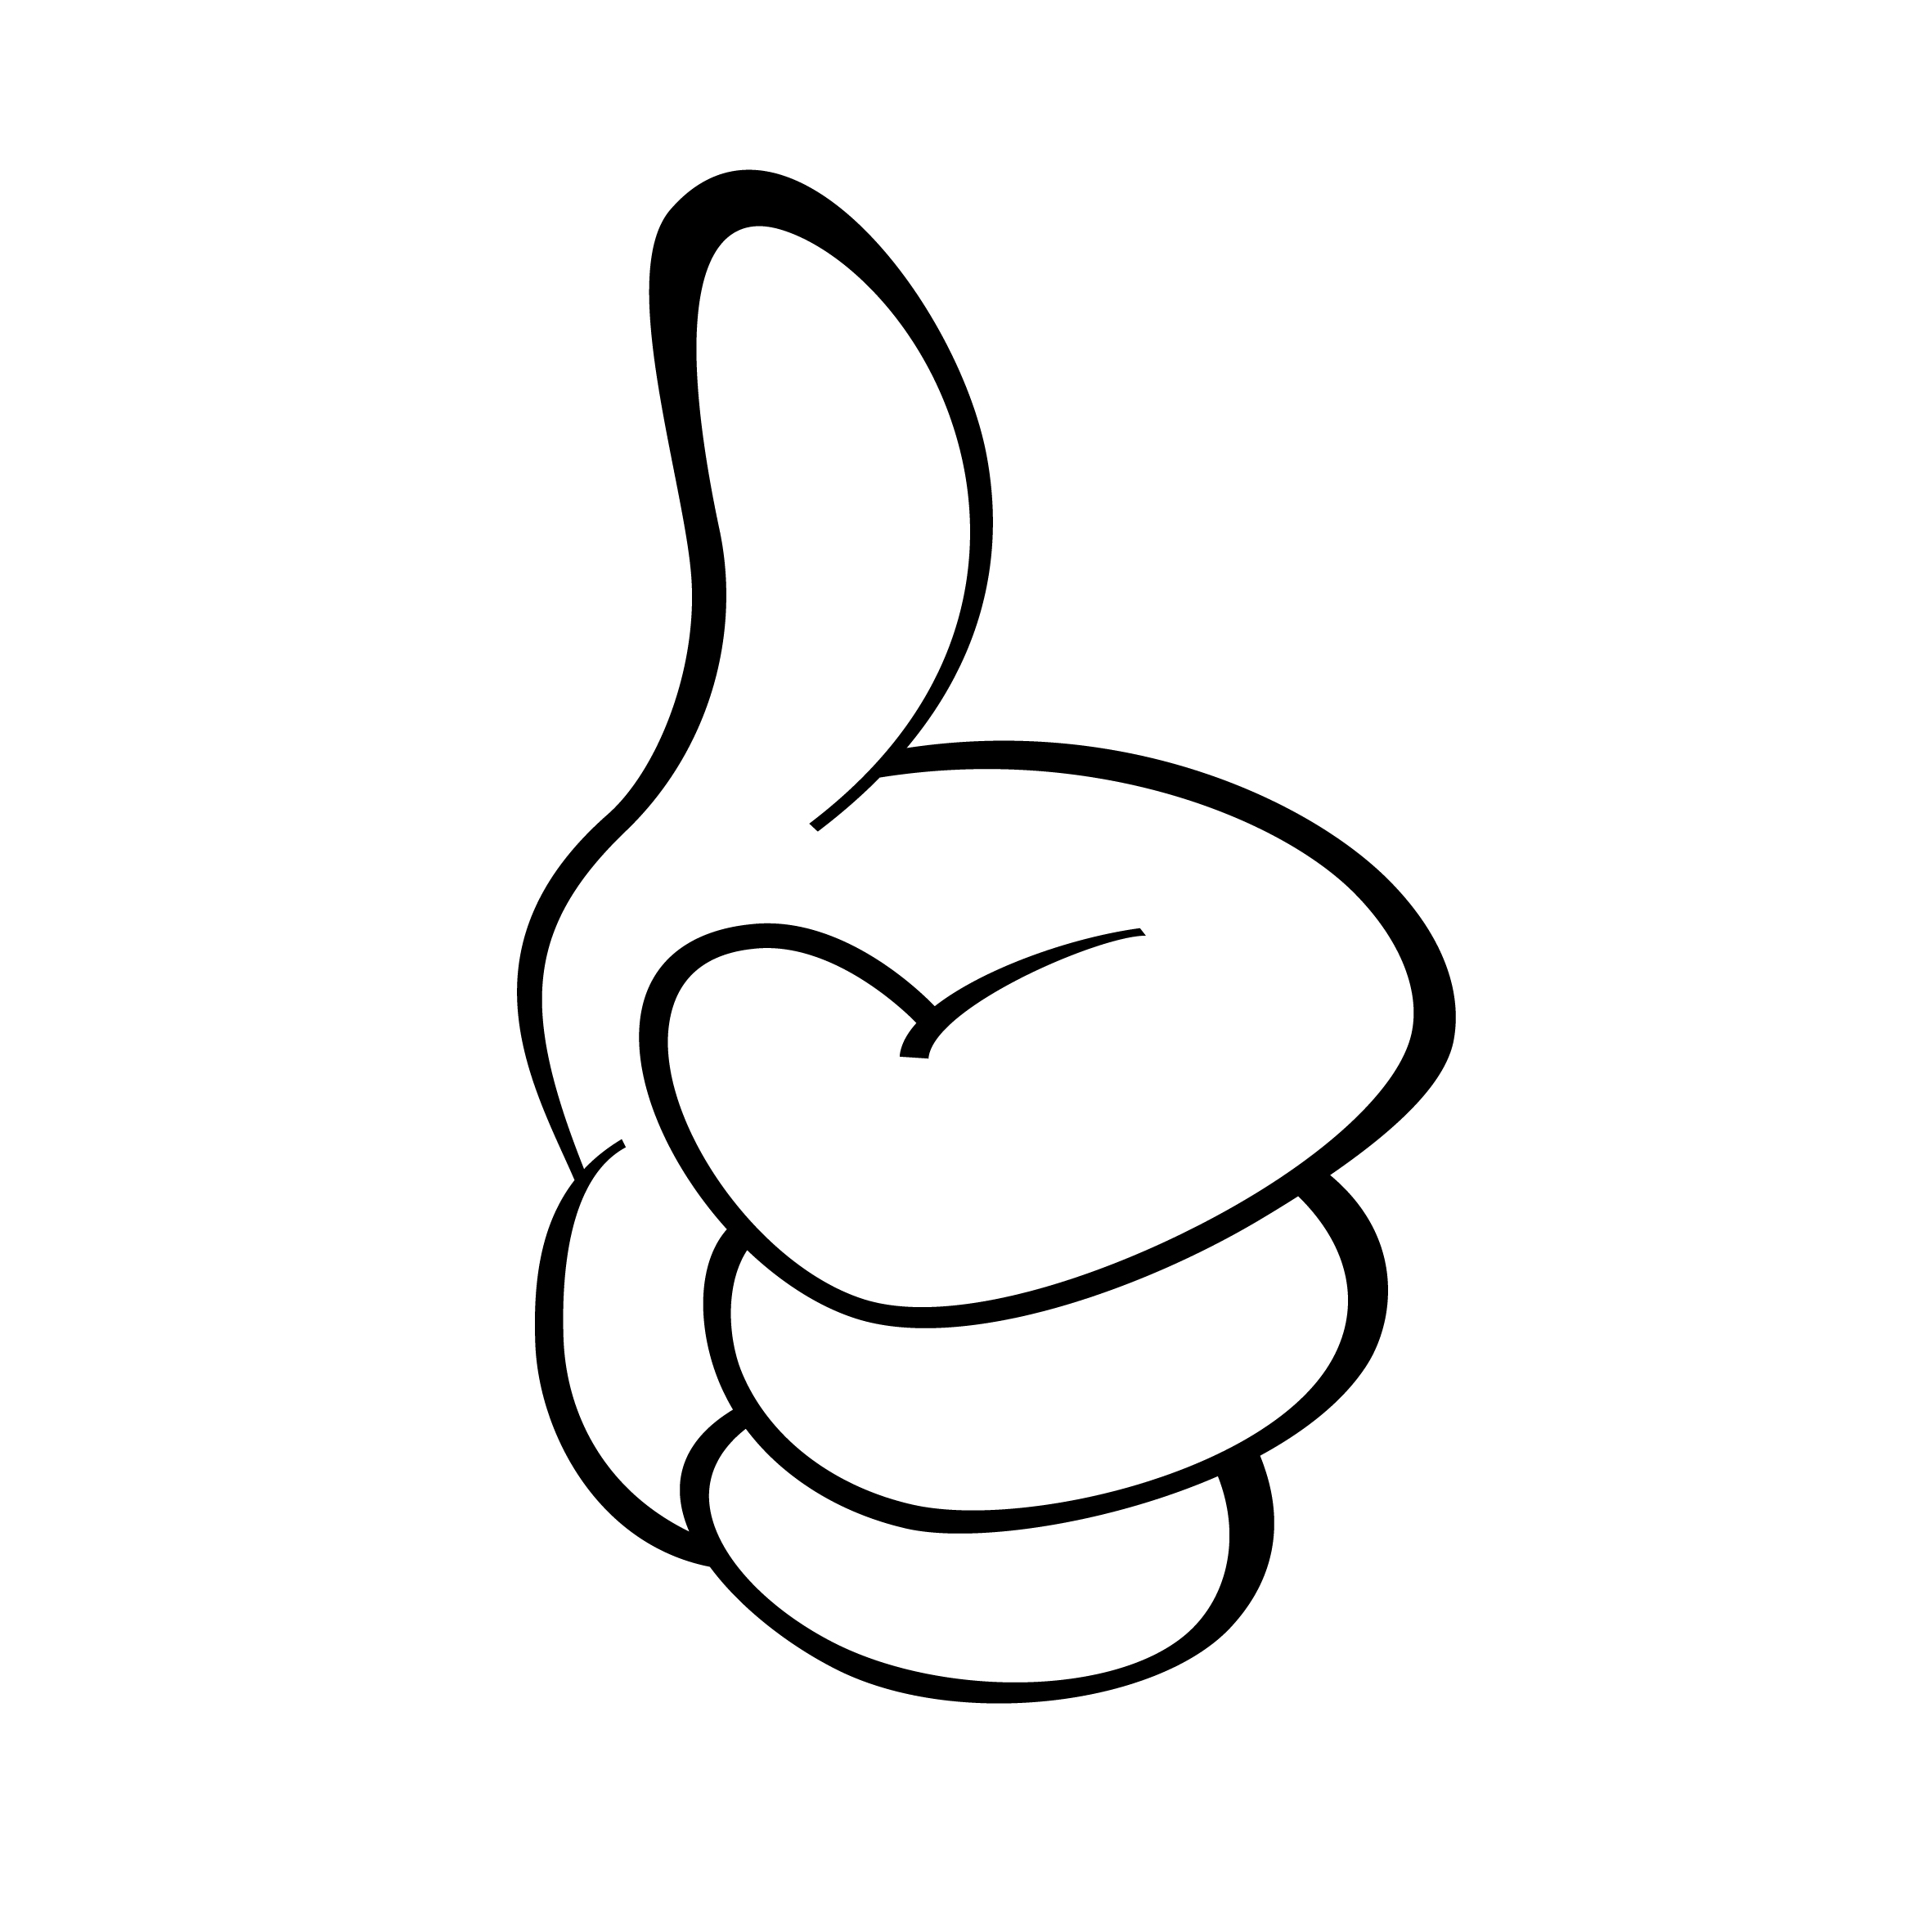 Thumbs Up Image - Thumbs Up Clipart Free